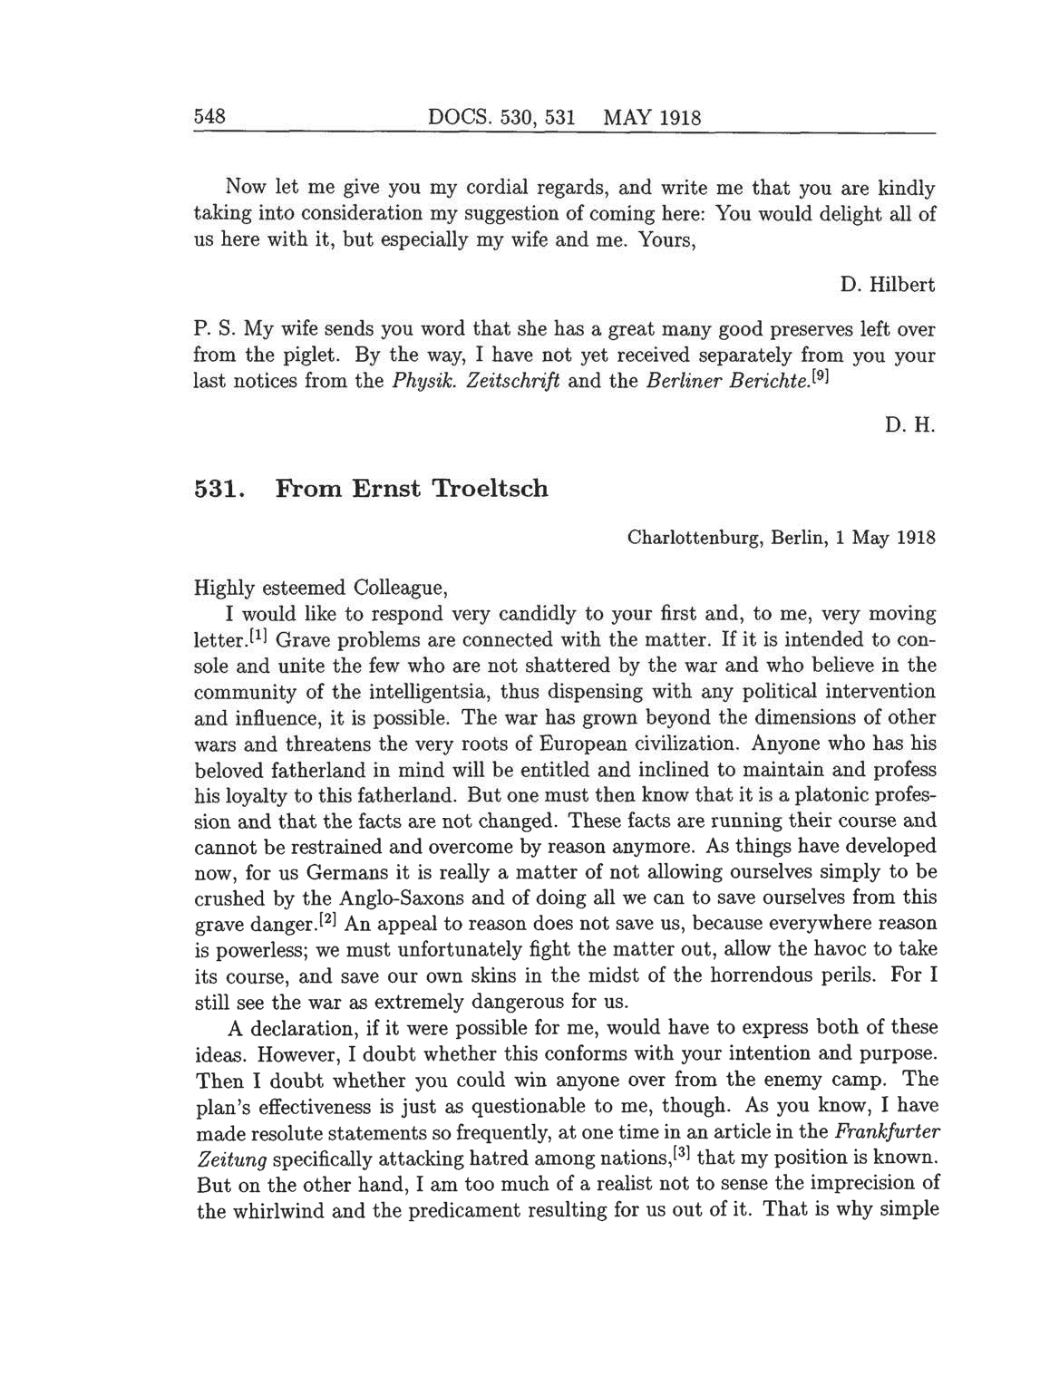 Volume 8: The Berlin Years: Correspondence, 1914-1918 (English translation supplement) page 548